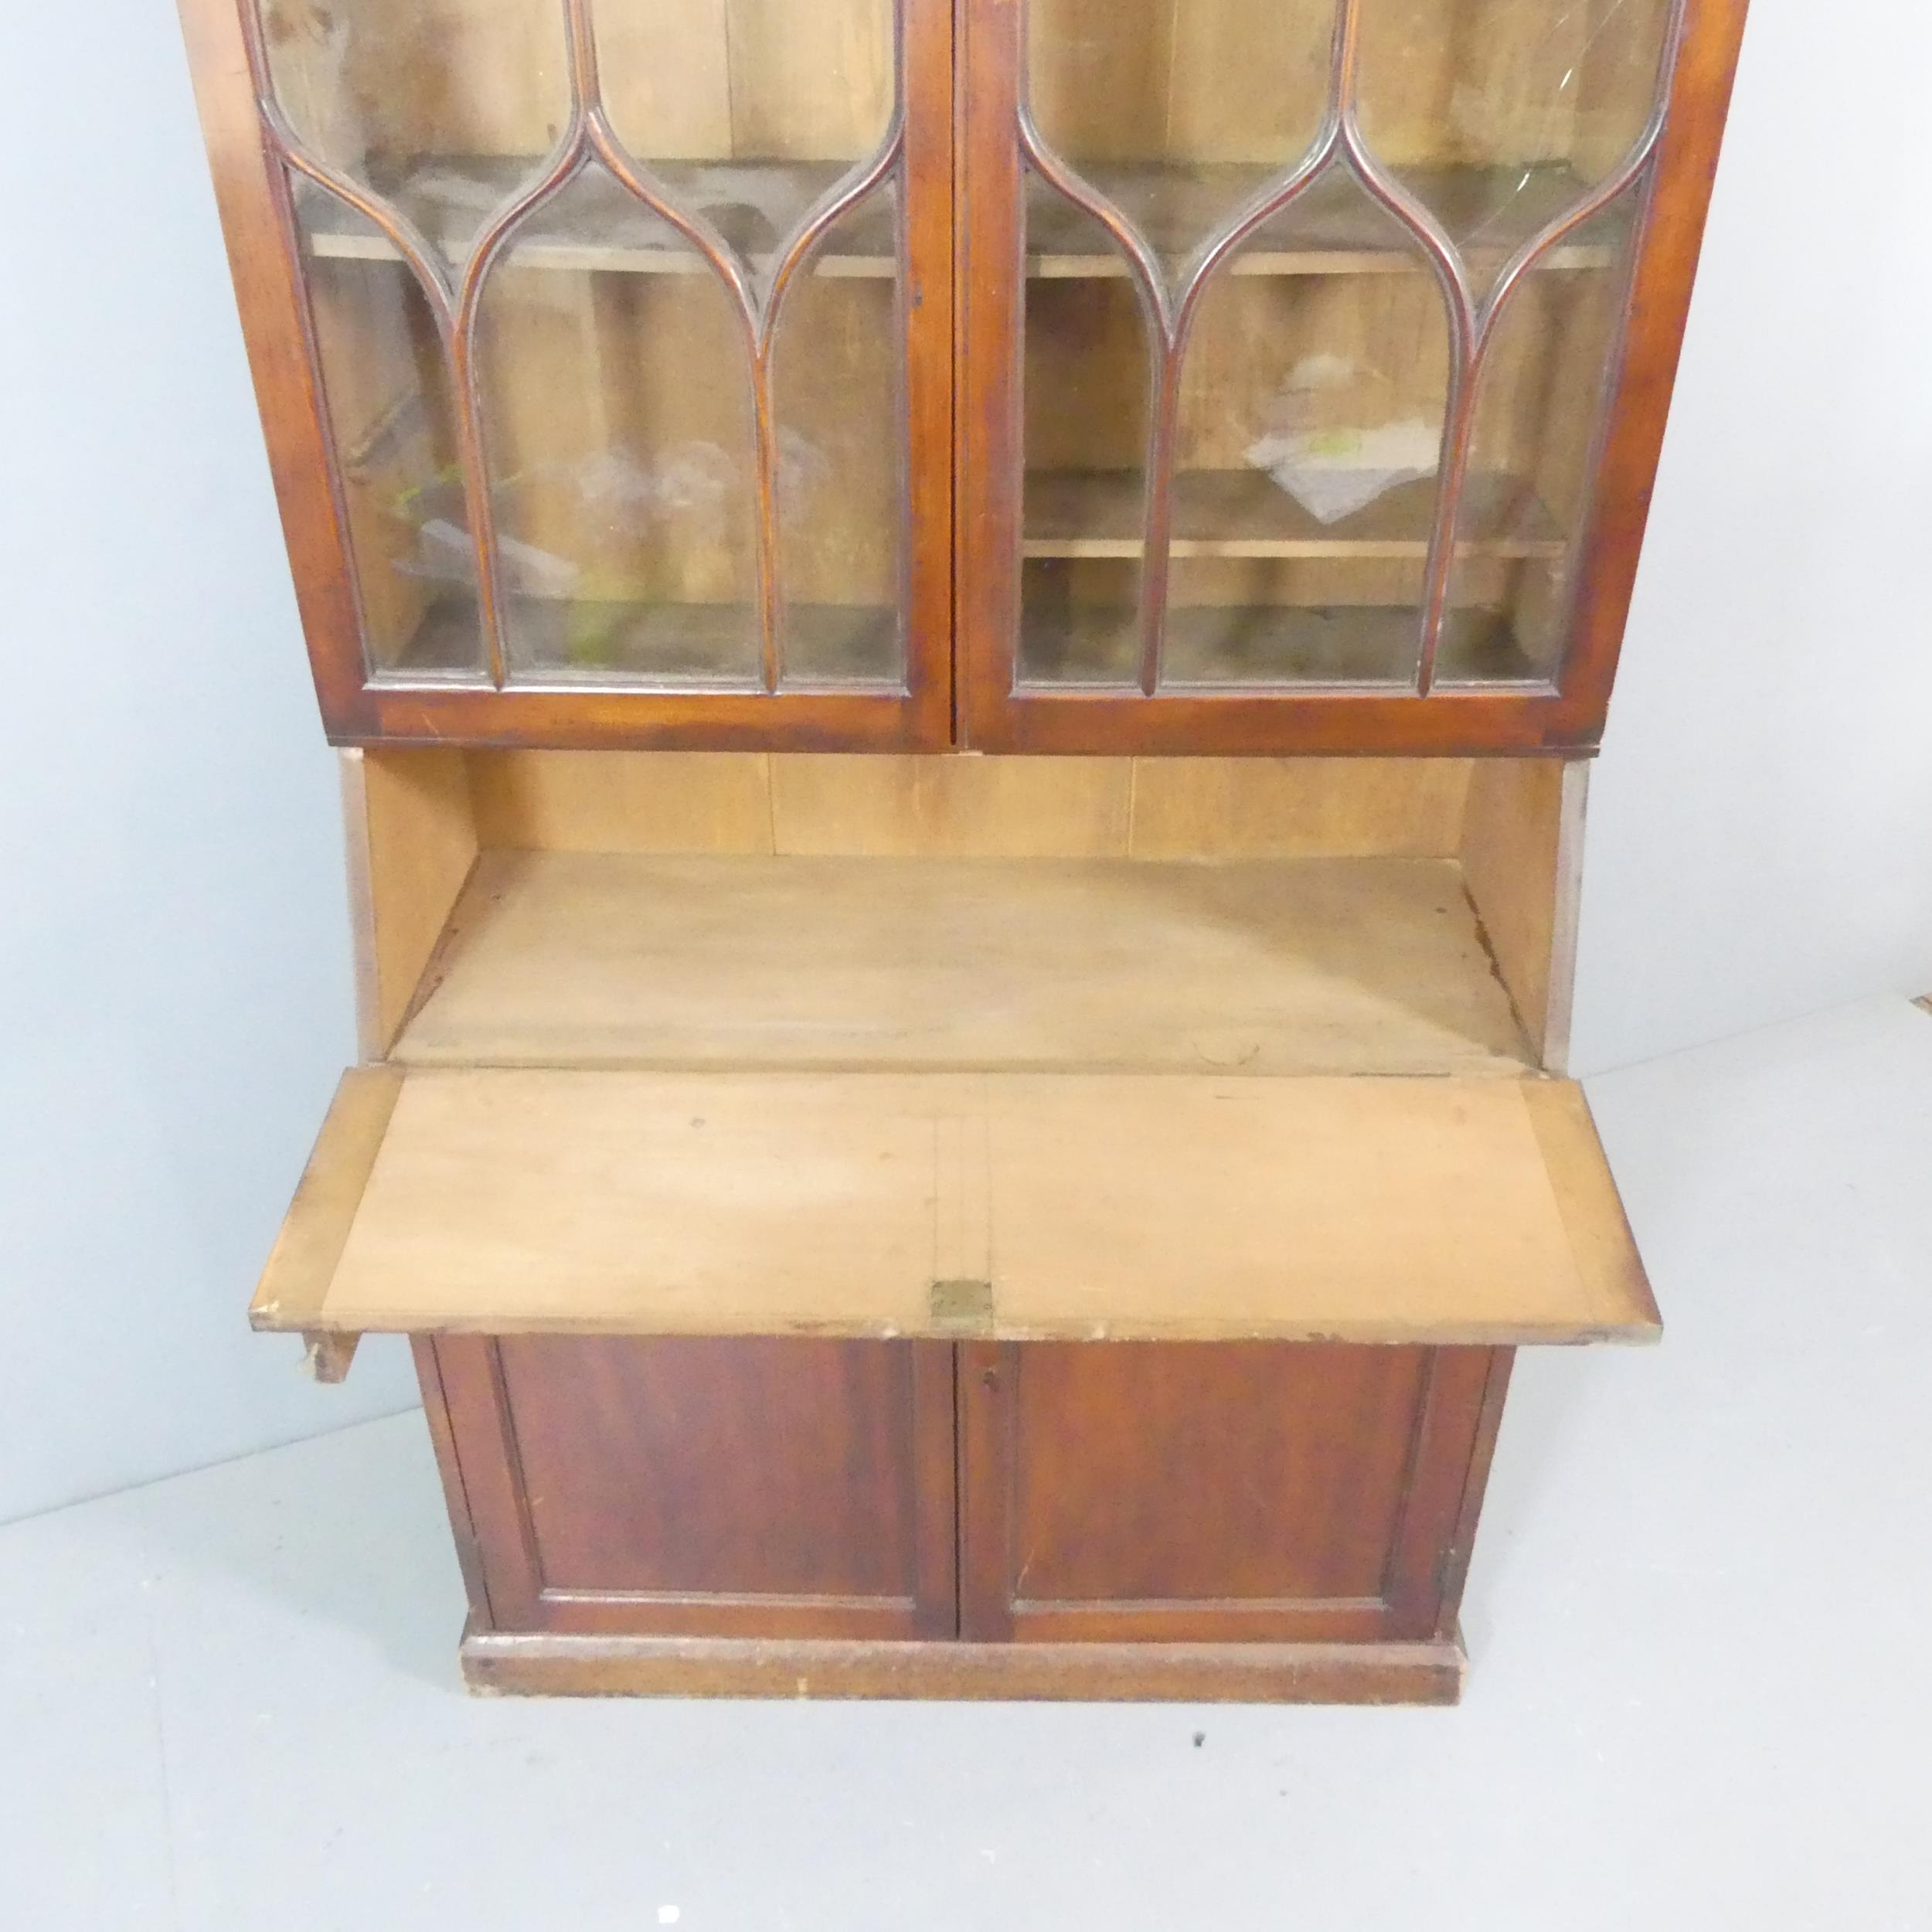 A 19th century mahogany bureau bookcase, with lattice glazed doors, fall front and cupboards - Image 2 of 2